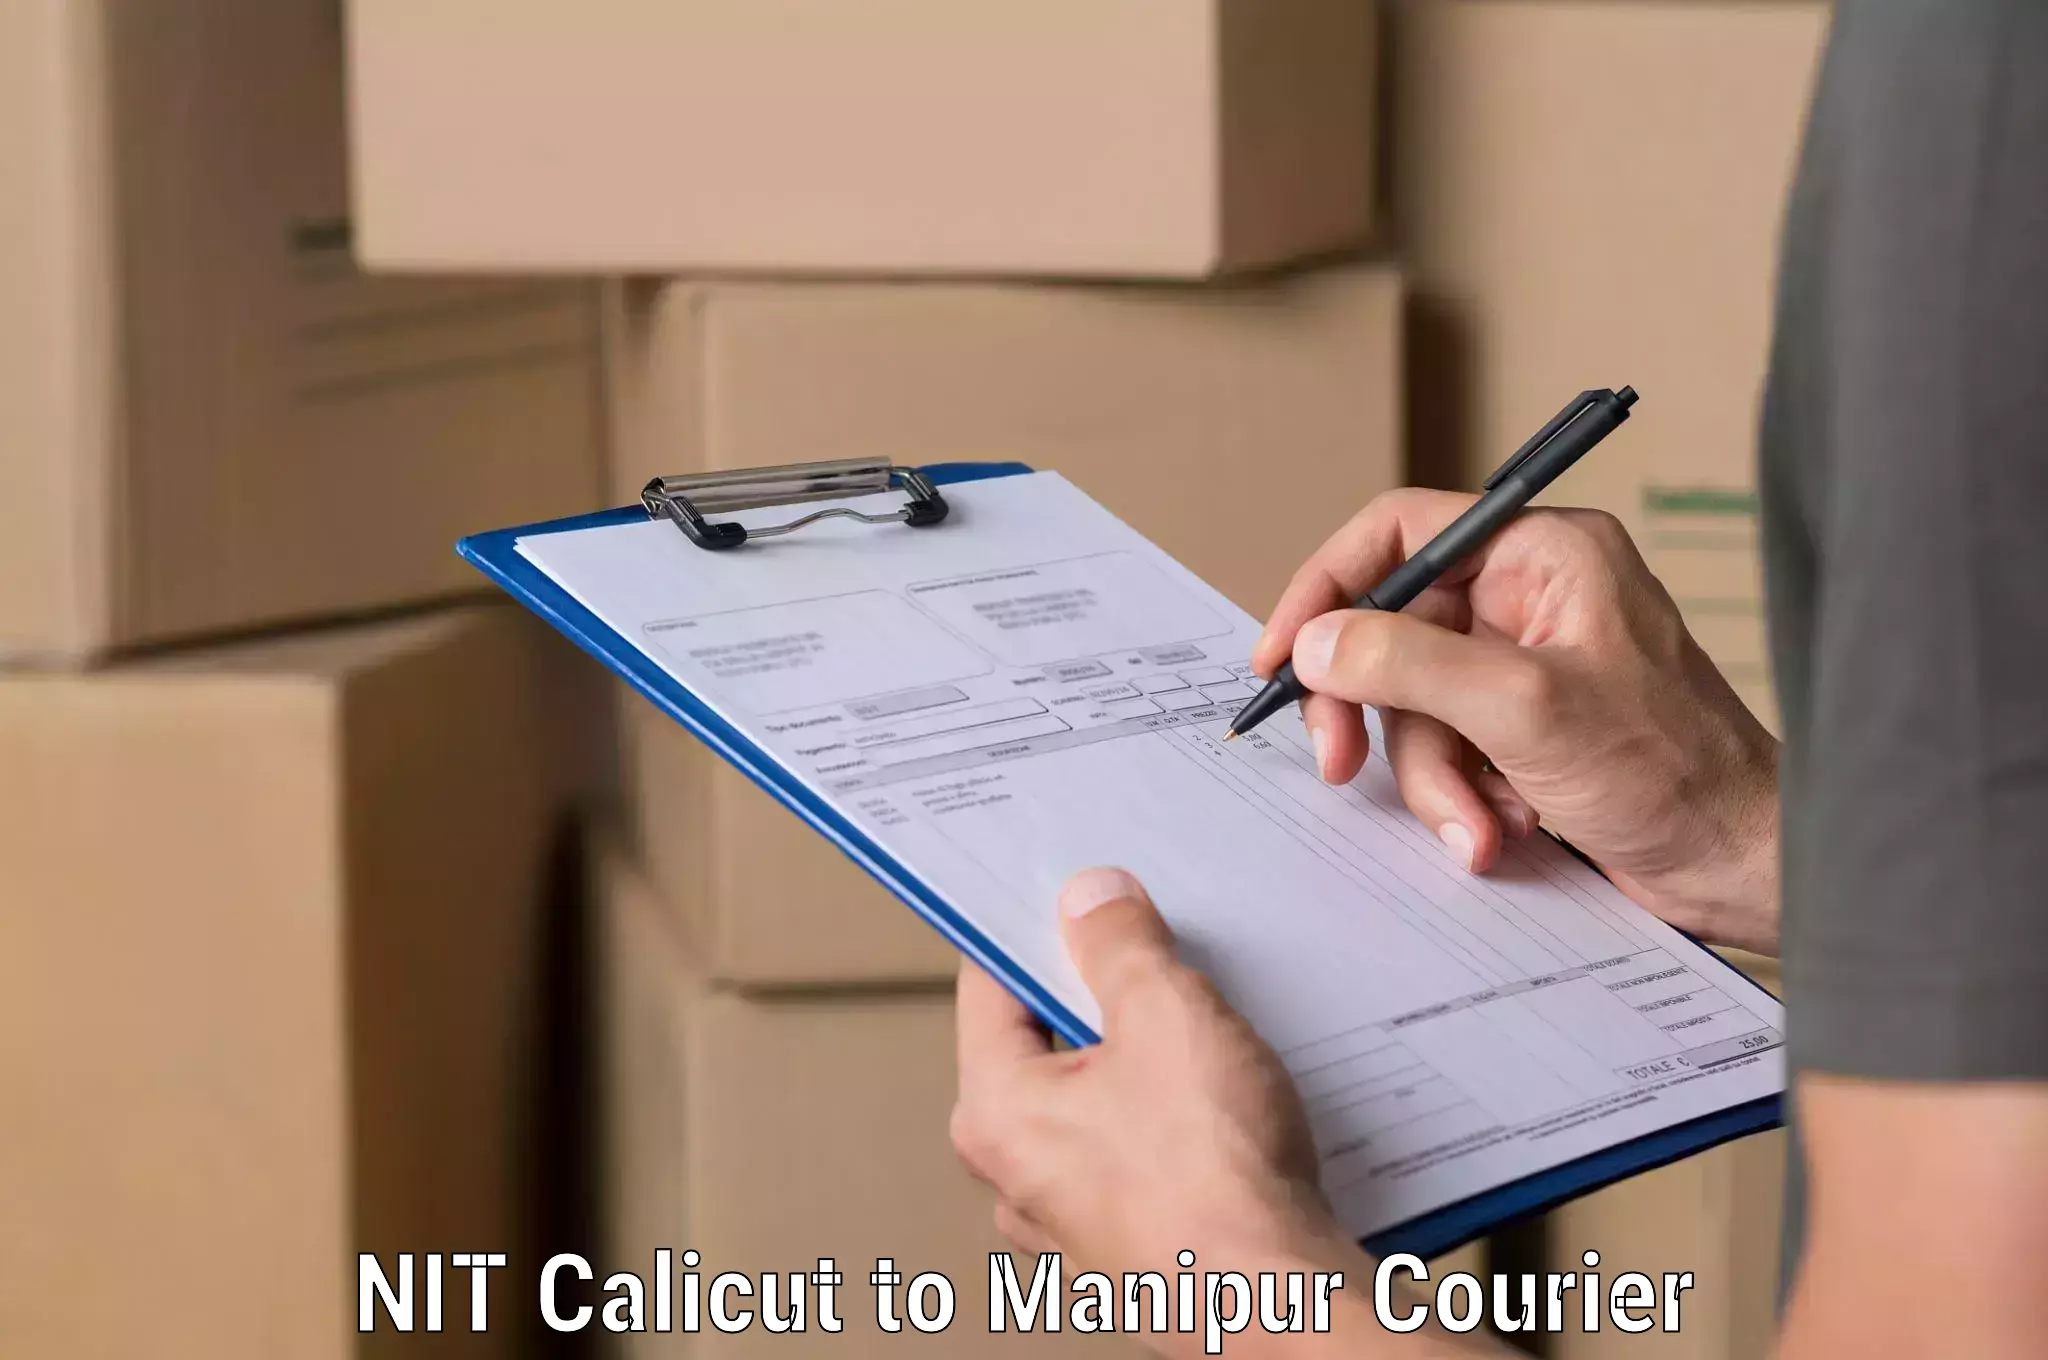 Online shipping calculator NIT Calicut to Manipur